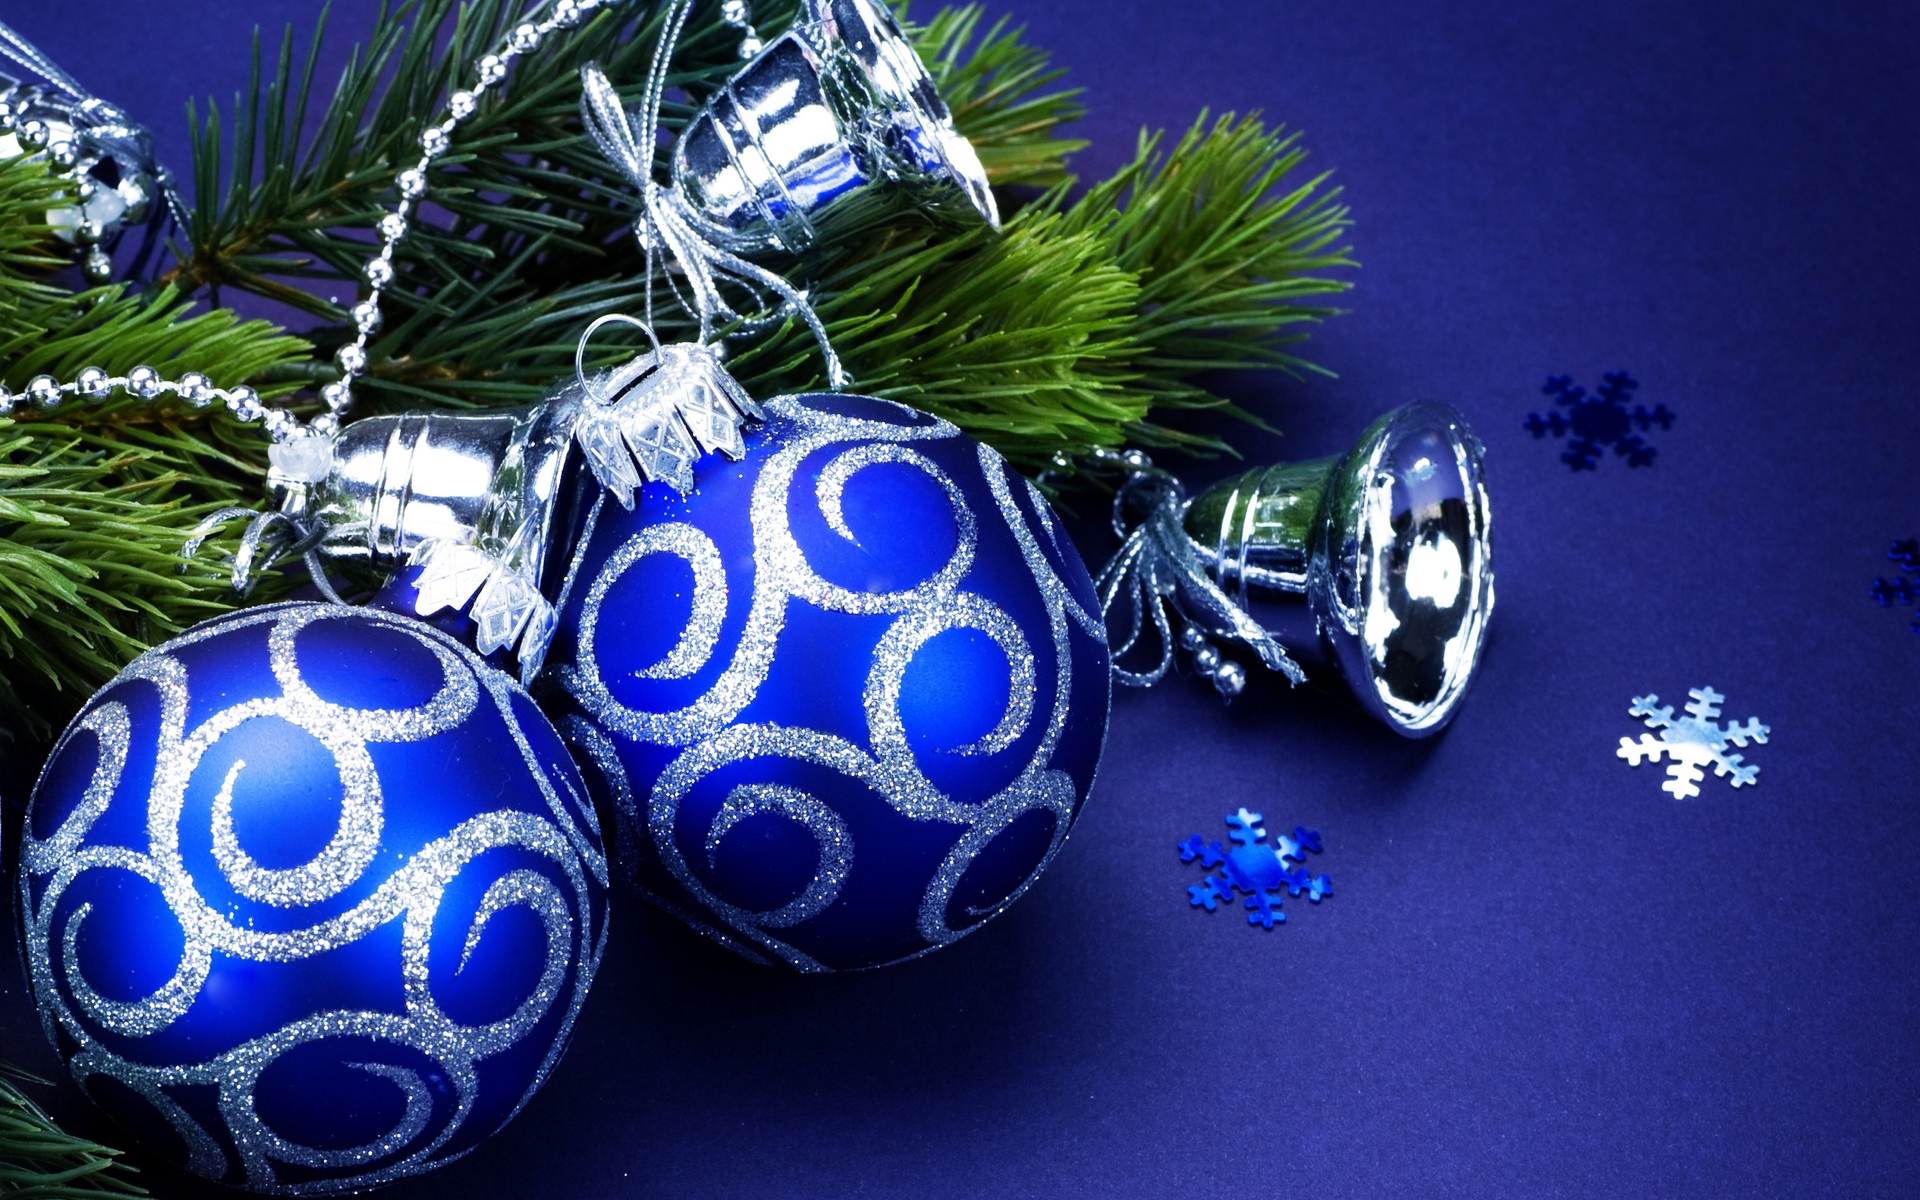 New Lock Screen Wallpapers holidays, new year, blue